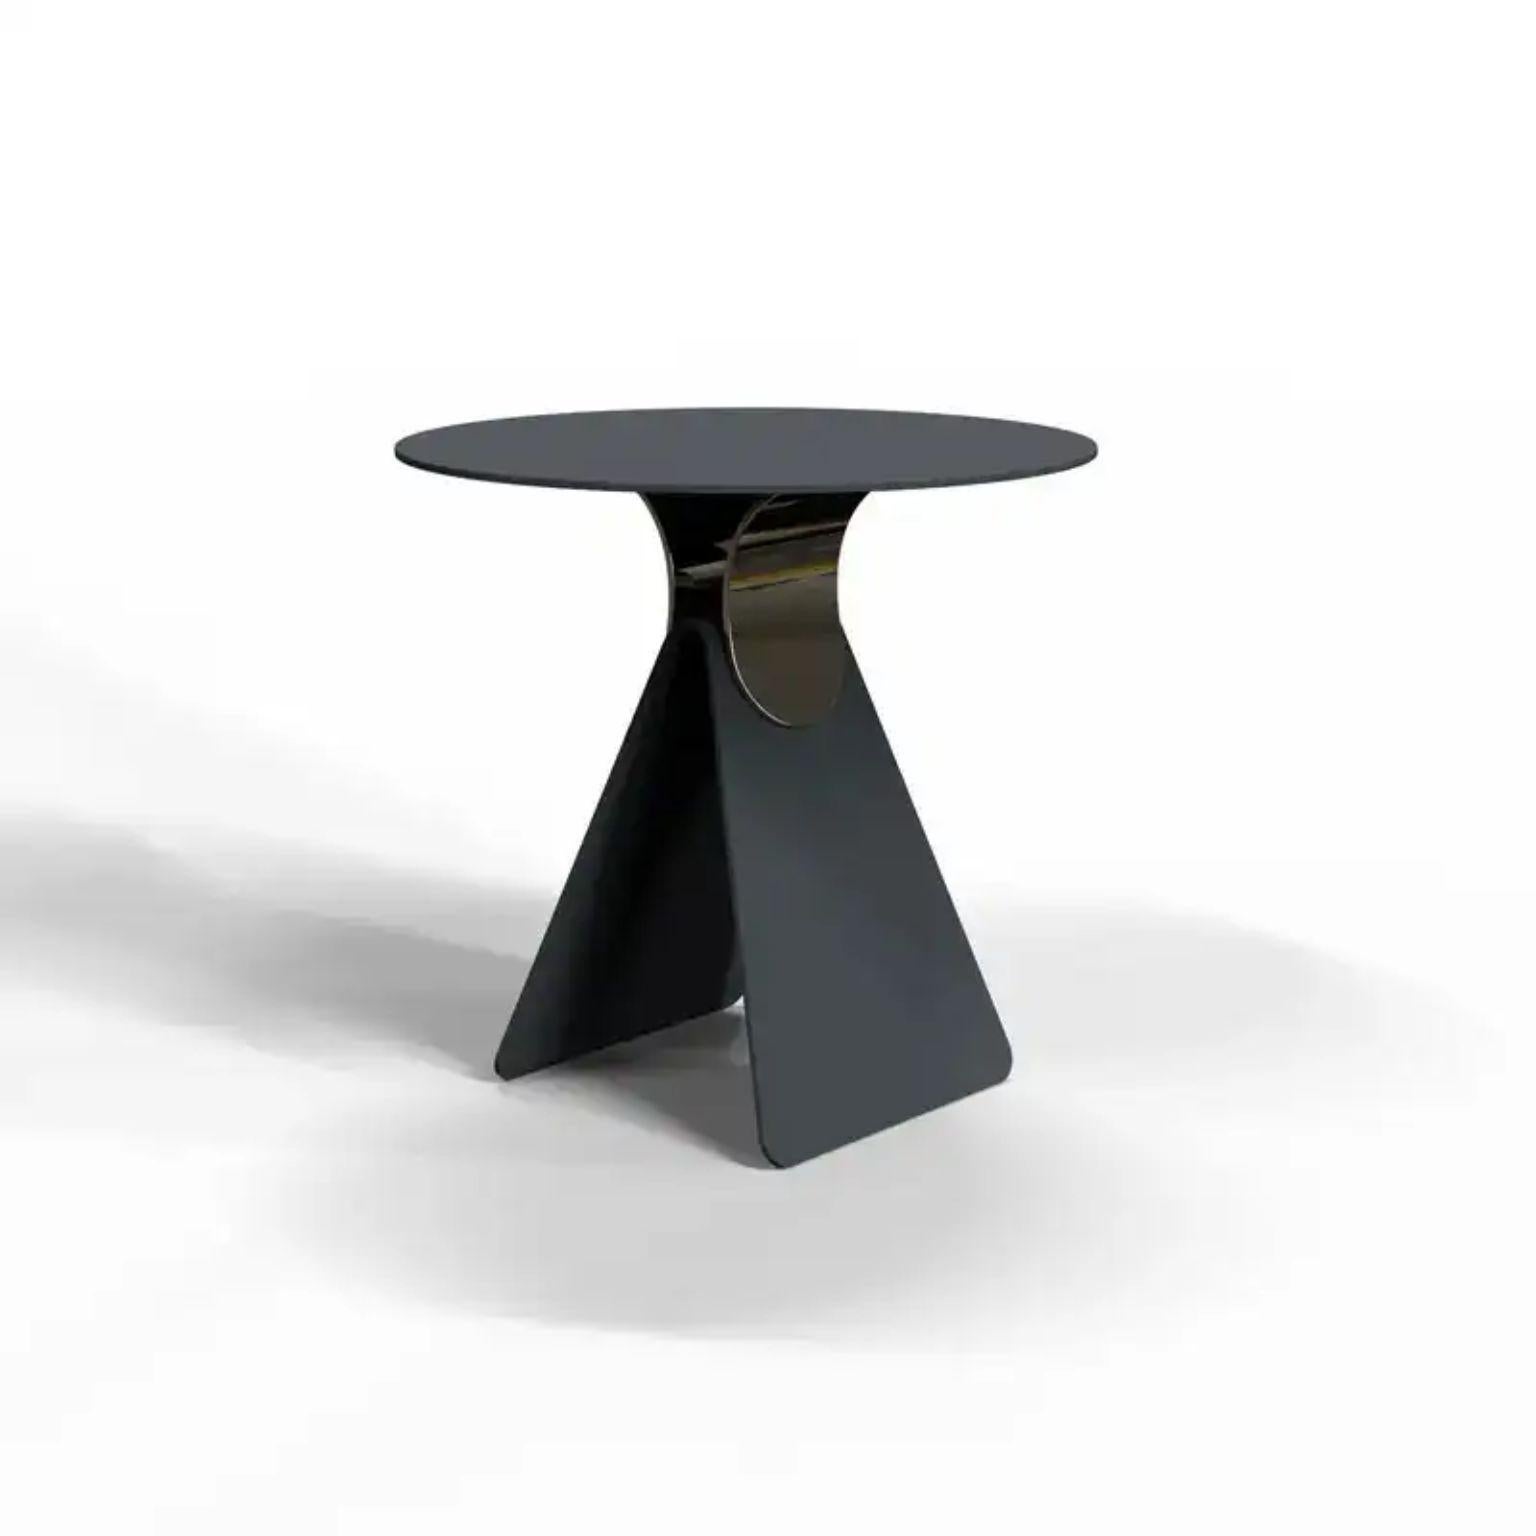 Cipputi midnight blue coffee table by Mason Editions.
Designed by Quaglio Simonelli.
Dimensions: Ø 50 cm x H 48 cm.
Materials: Metal.

Available in different colors.
Cipputi is a side table designed by metal sheets that fold and assemble to